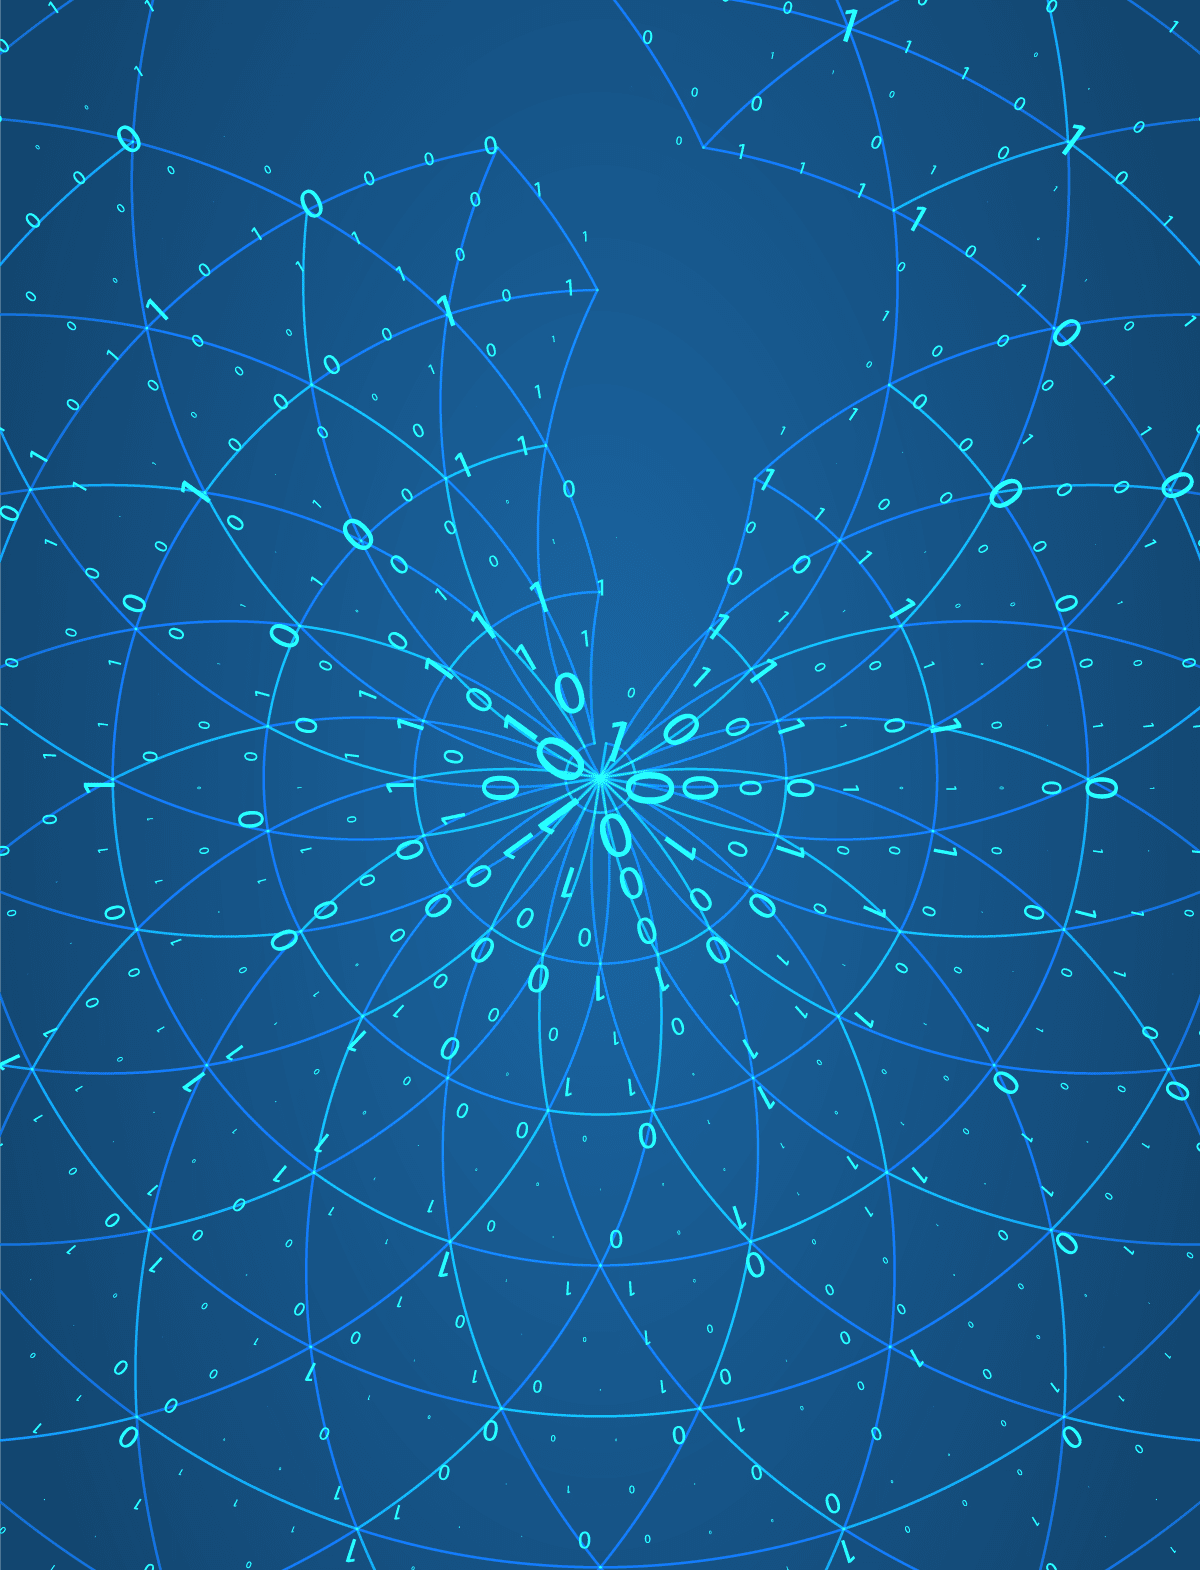 This illustration is a visually arresting arrangement of thin pale blue lines on a darker blue background. The lines are in concentric circles but two sets of concentric circles that overlay each other. There are ones and zeros along all the lines. It elicits a sense of abstract high-tech connectivity and intersectionality. This image relates to content about the AML software and GRC software solutions of AML Partners and its RegTechONE platform for AML software.